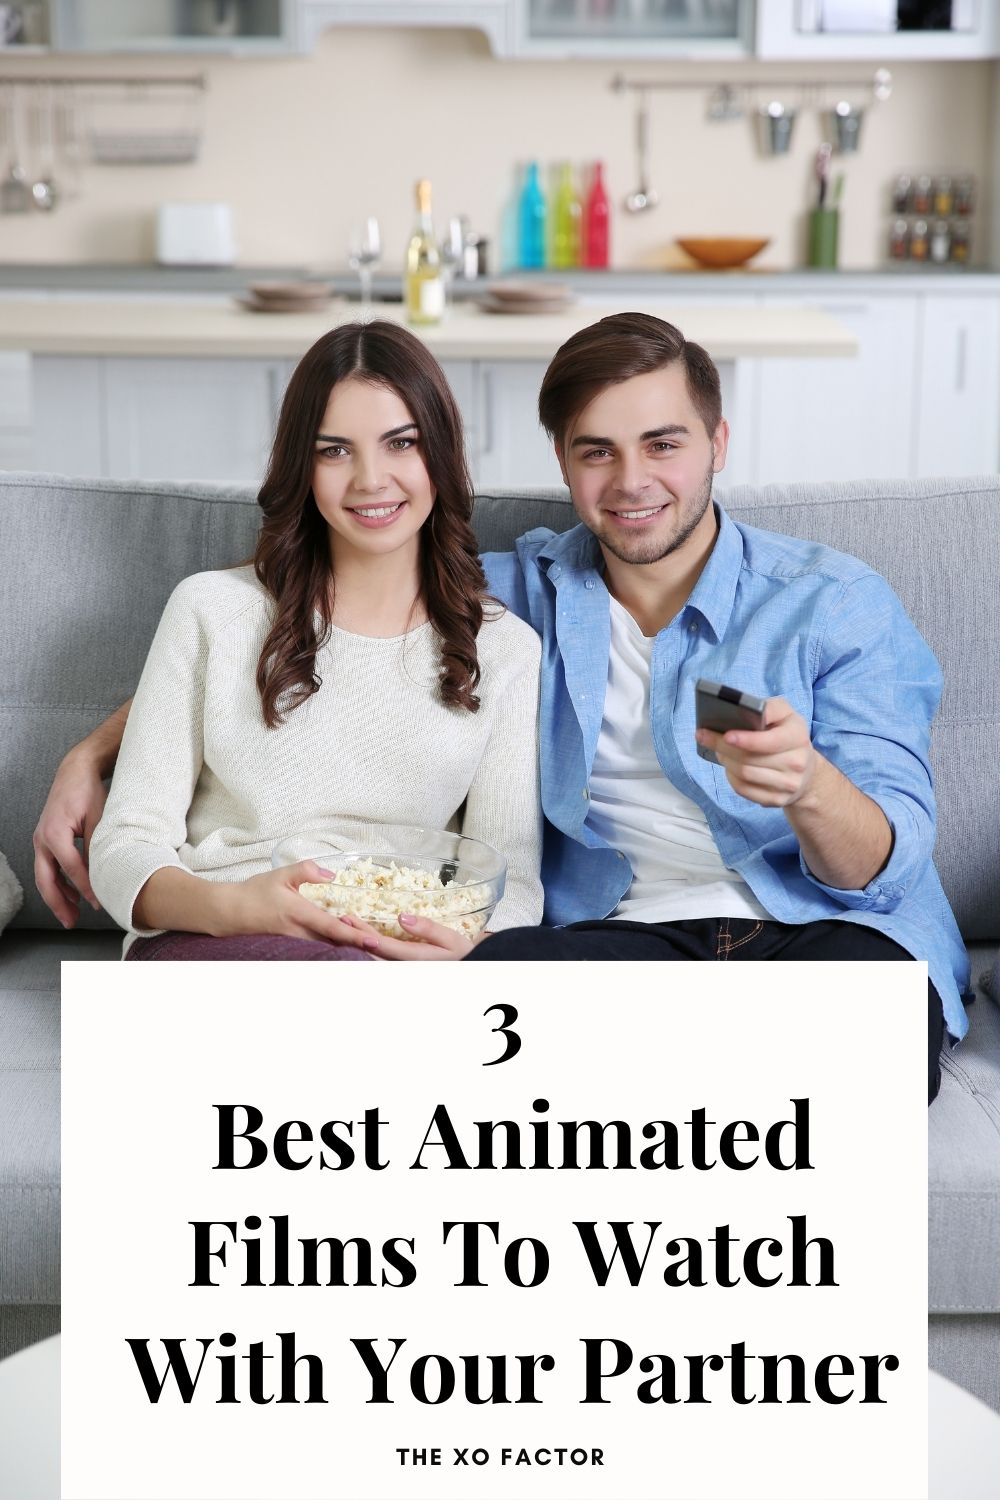 The Best Animated Films To Watch With Your Partner